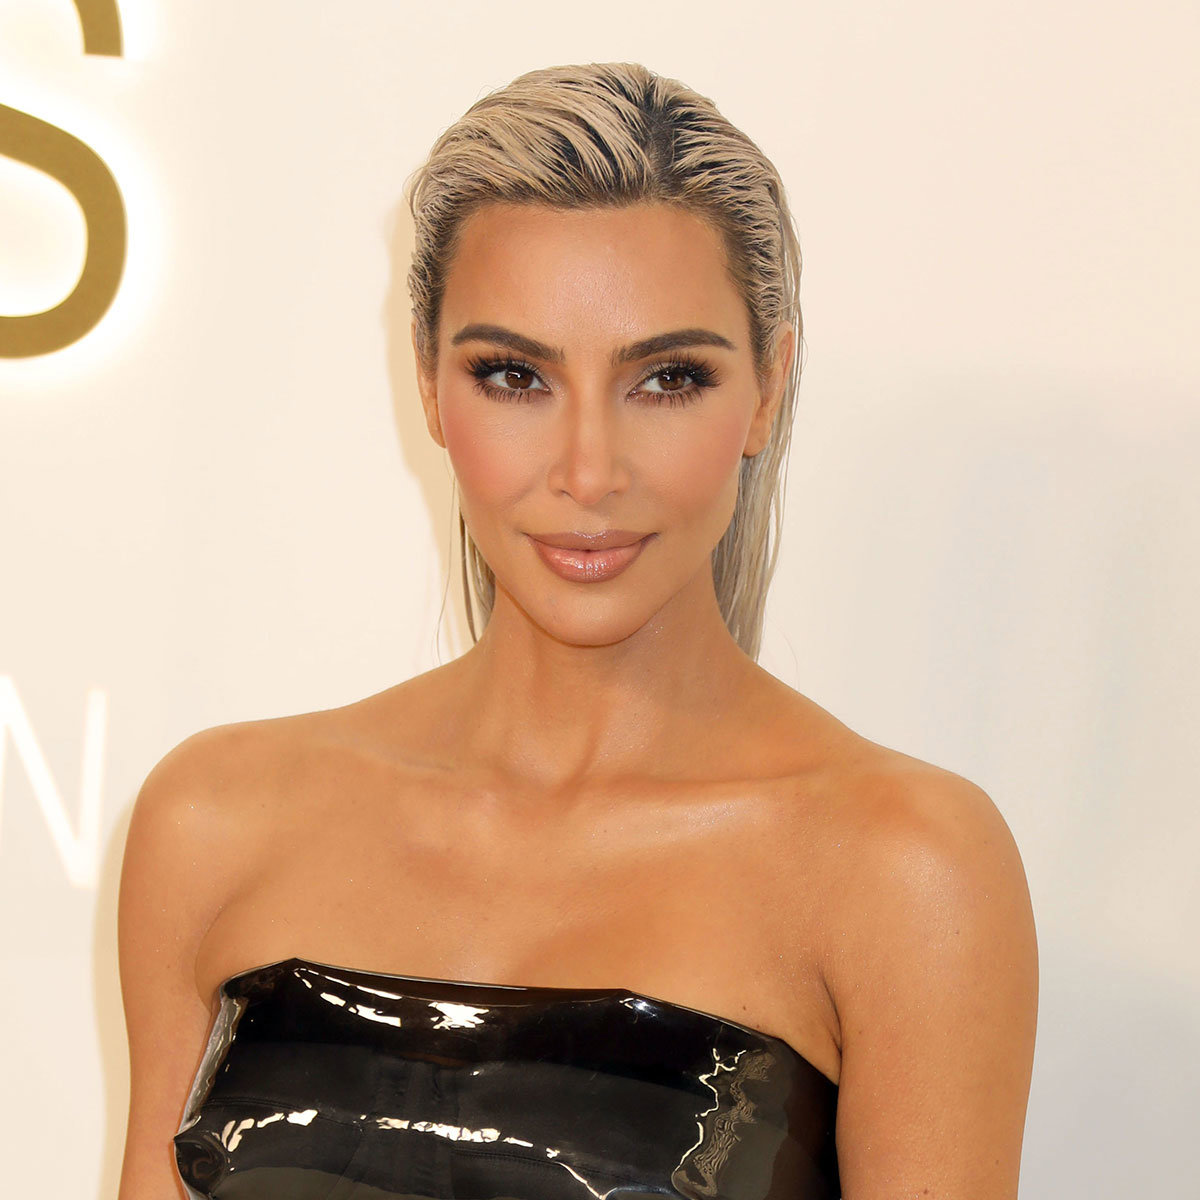 Kim Kardashian Flaunts Her Curves In A Crystal Covered Bodysuit For Swarovski And Skims Collab